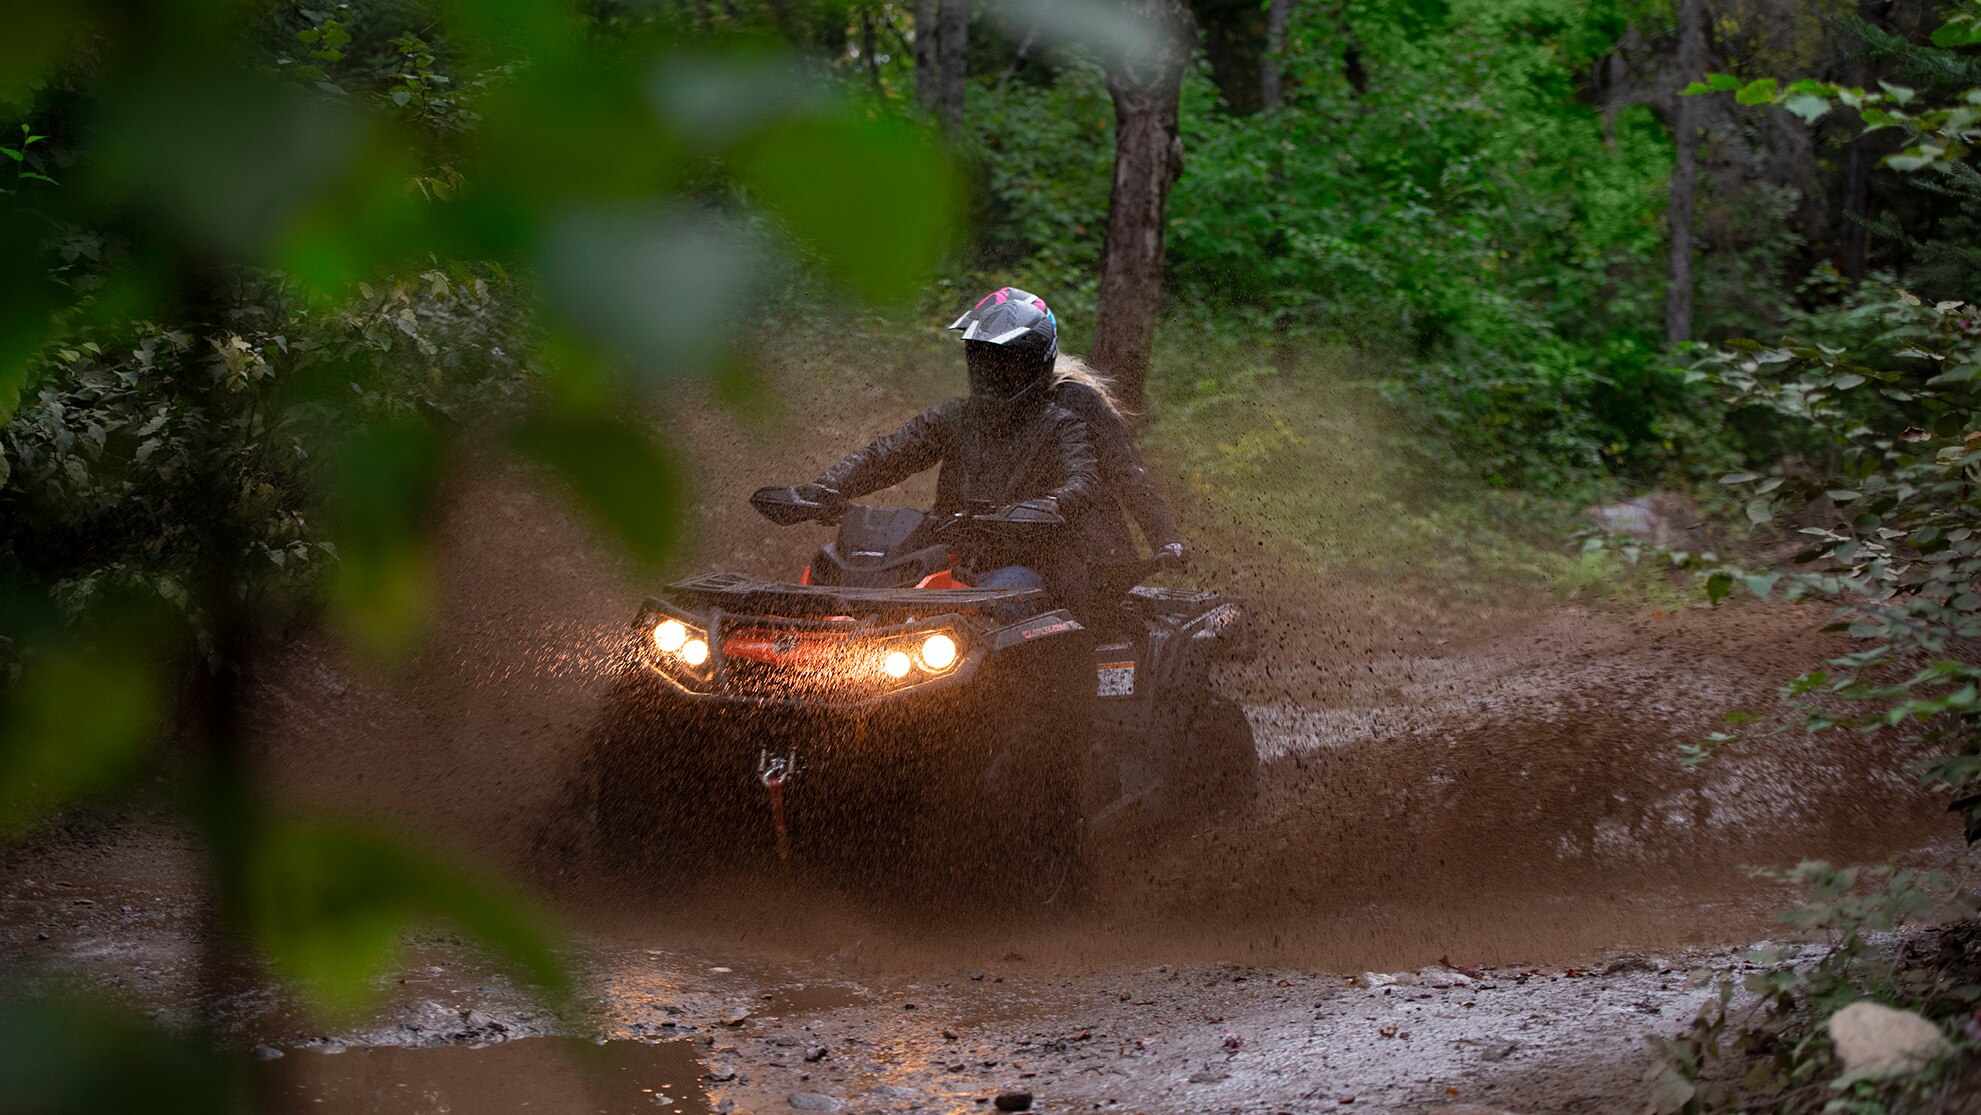 A couple on an ATV riding in the mud 